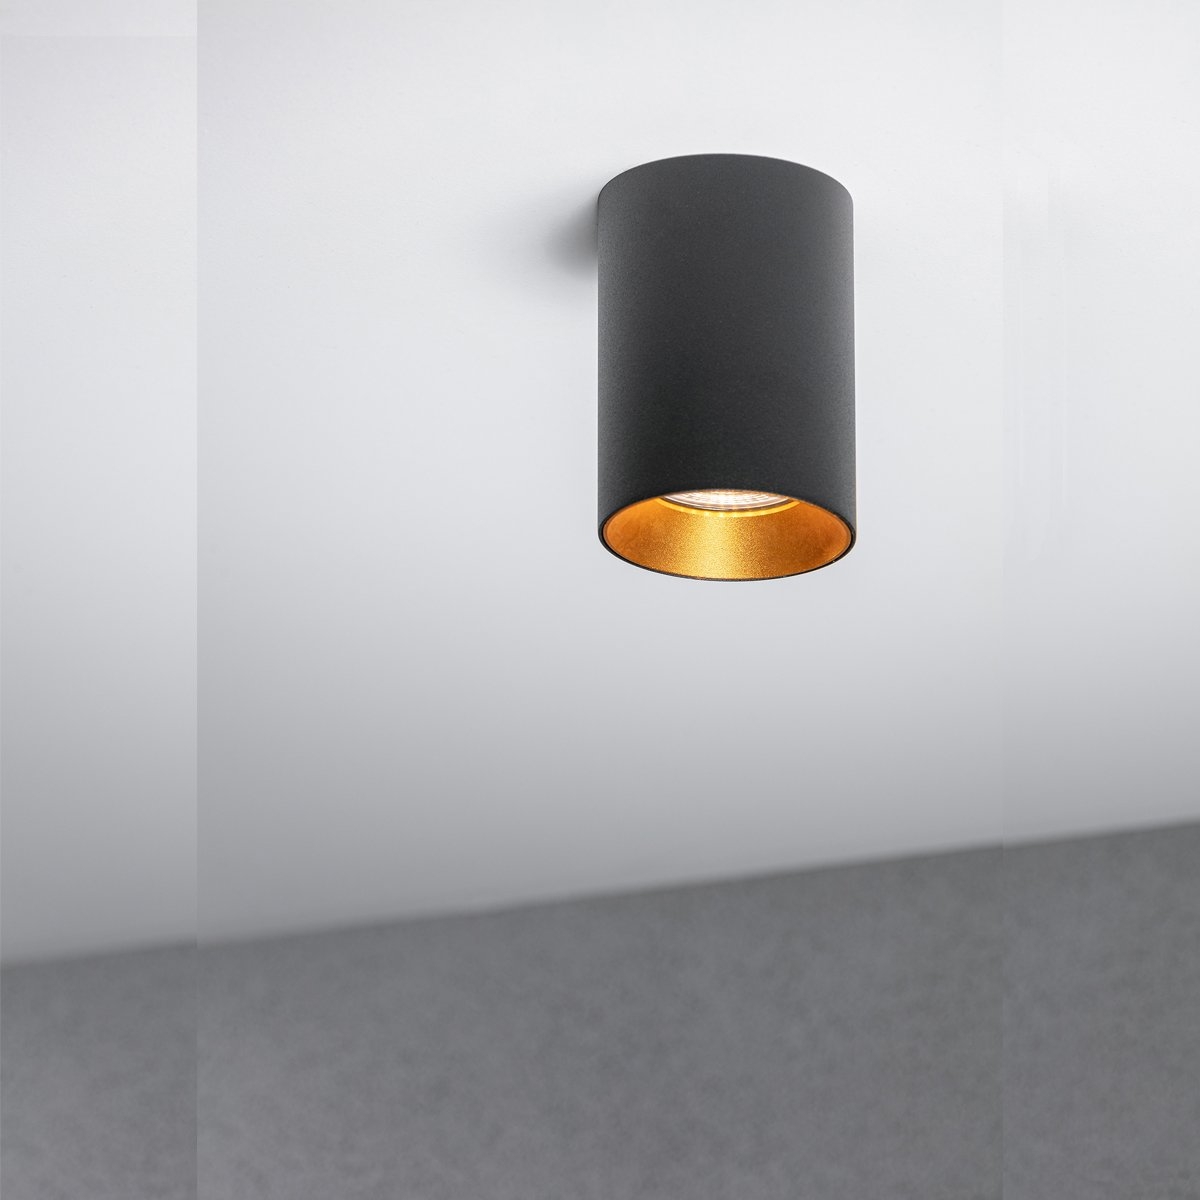 Black Or White Round Ceiling Down Light With Copper Reflector Black – By CGC Interiors